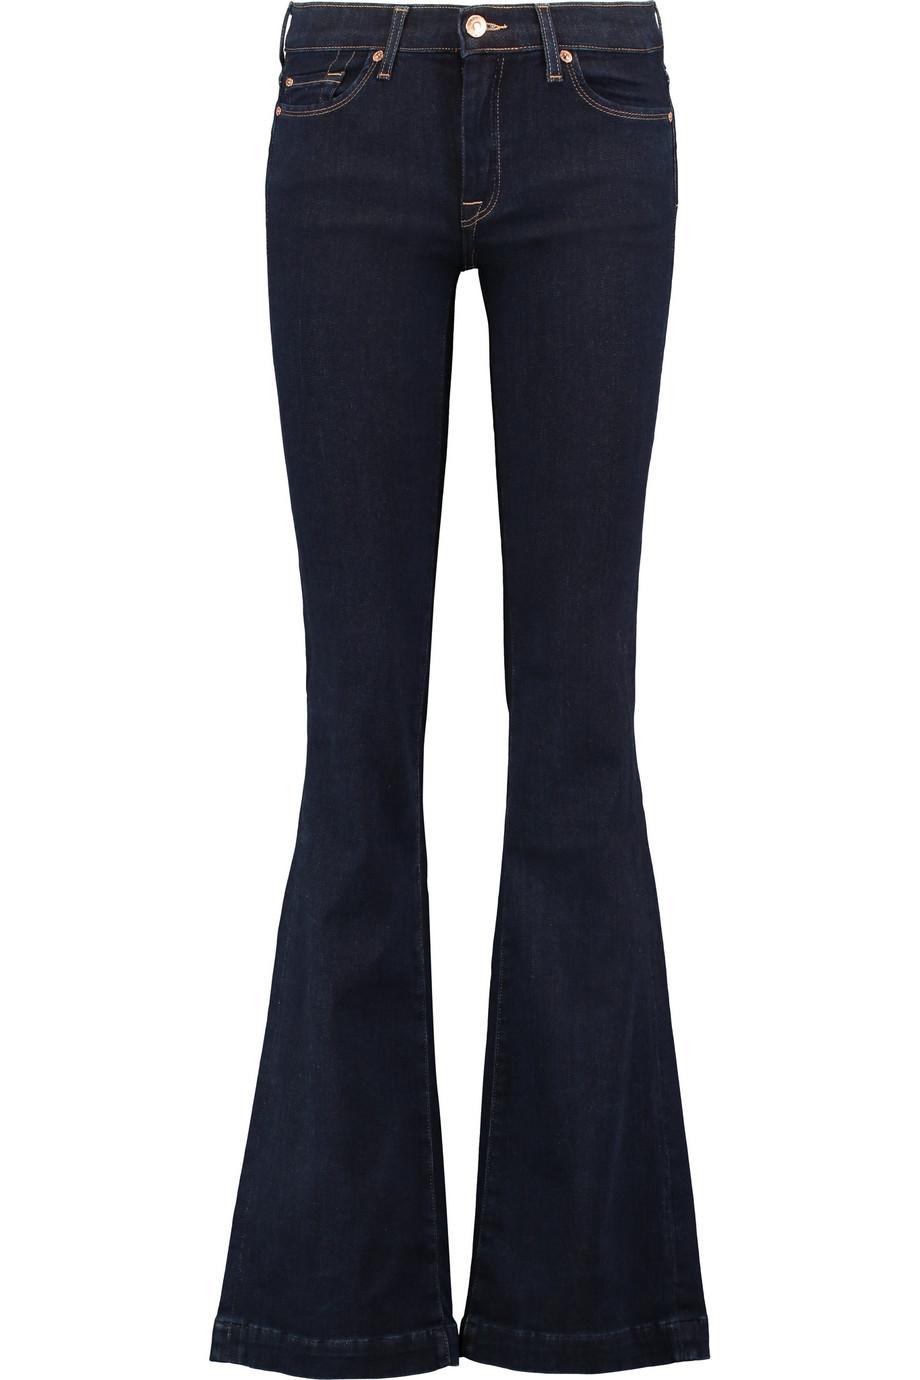 7 For All Mankind Charlize Mid-rise Bootcut Jeans | ModeSens